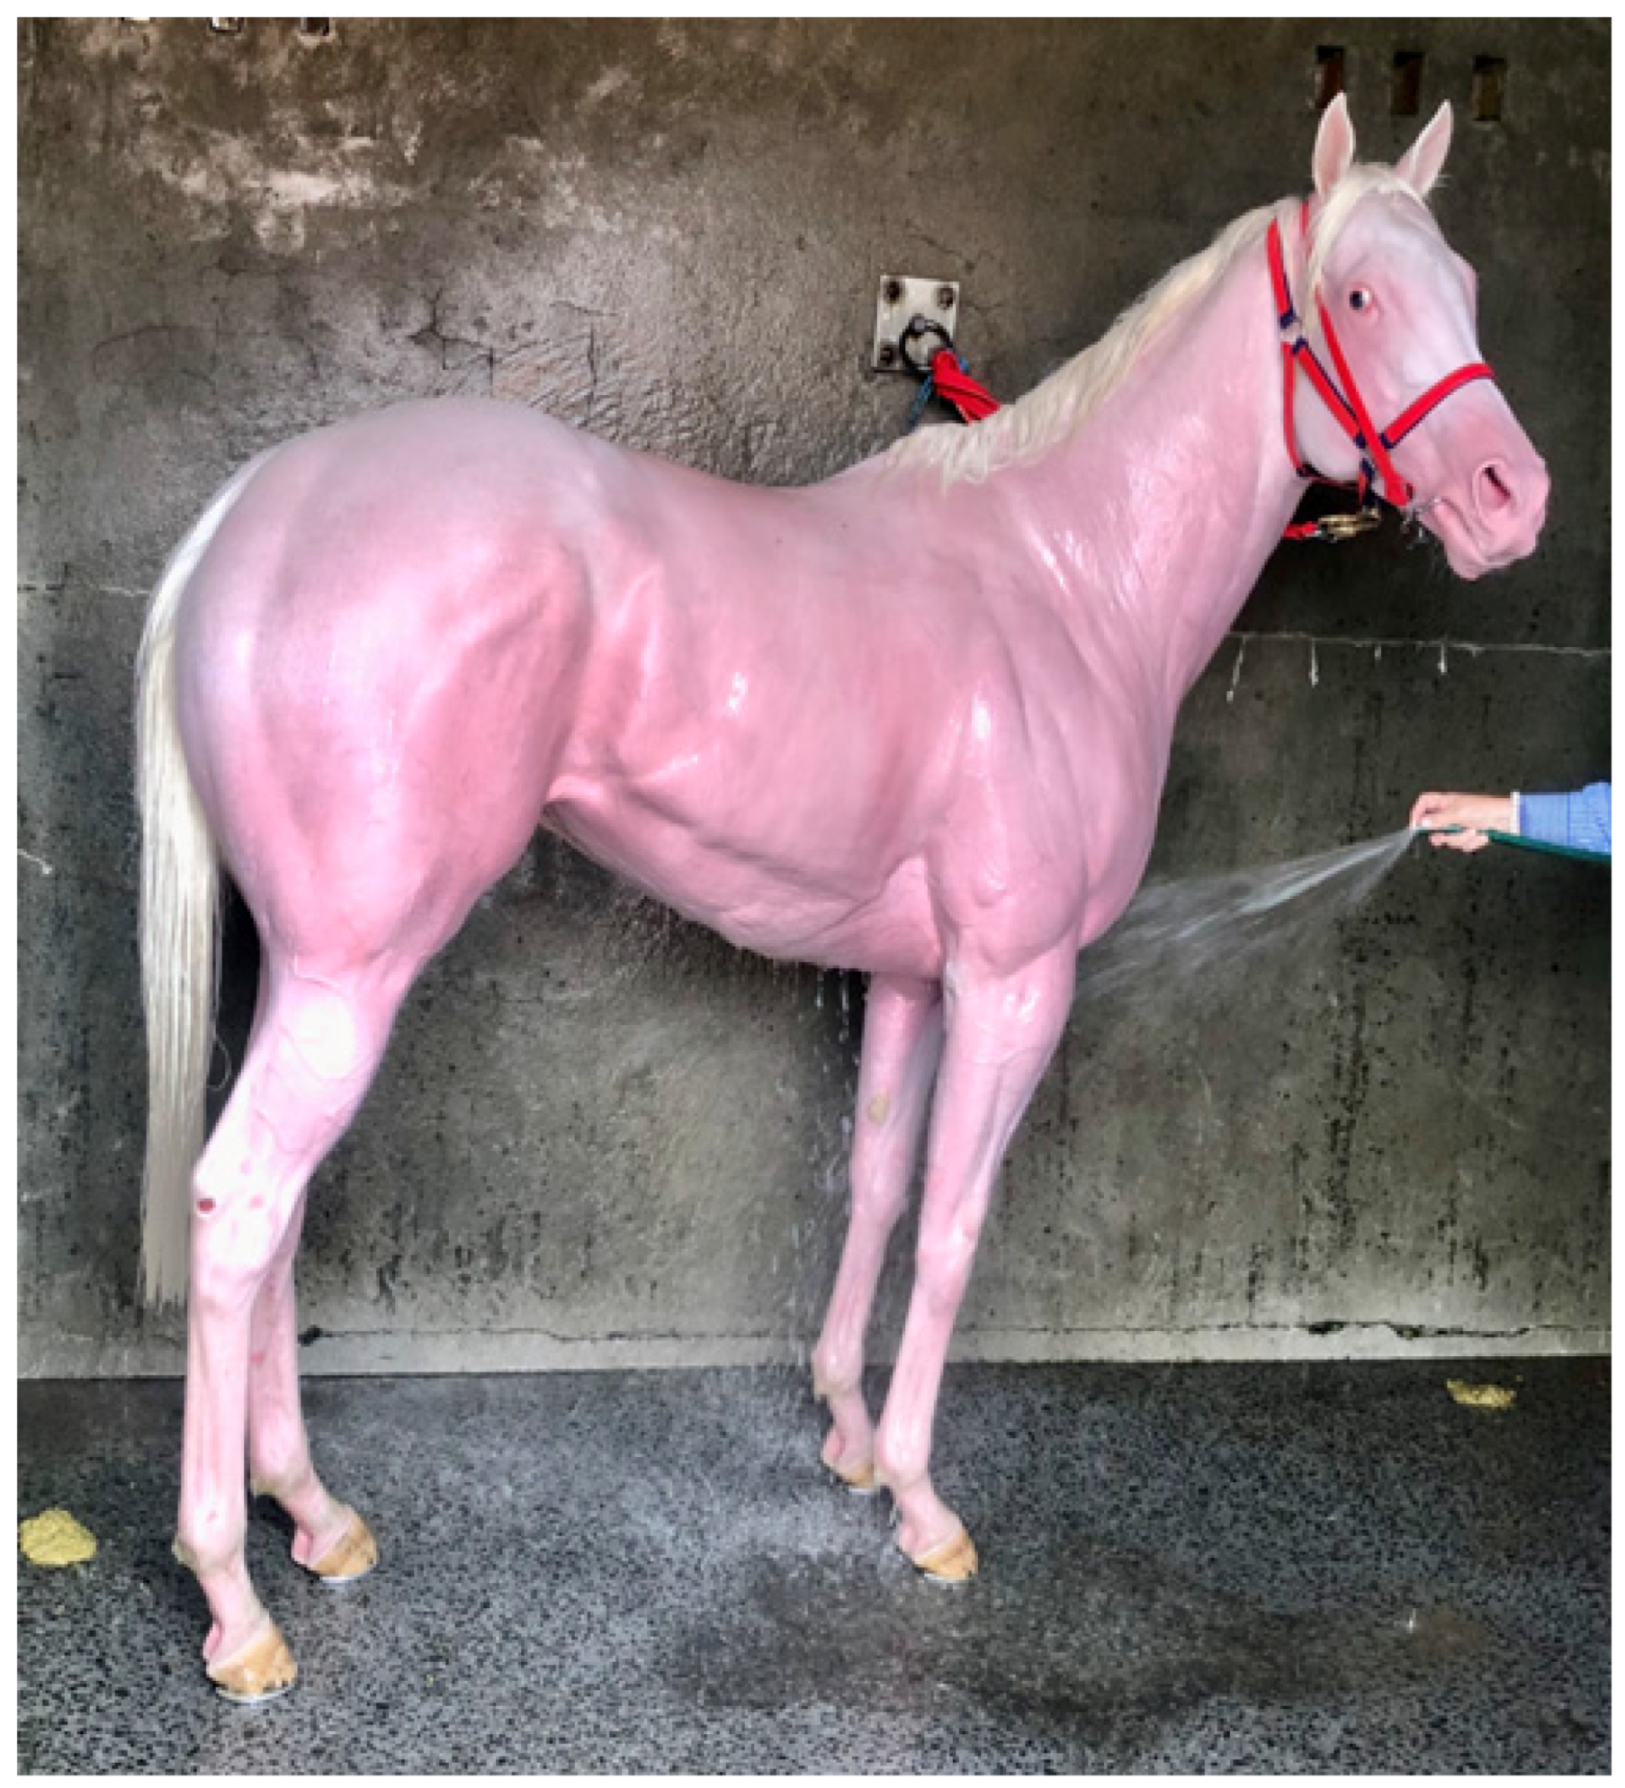 Animals | Free Full-Text | An Overview of Exertional Heat Illness in  Thoroughbred Racehorses: Pathophysiology, Diagnosis, and Treatment Rationale